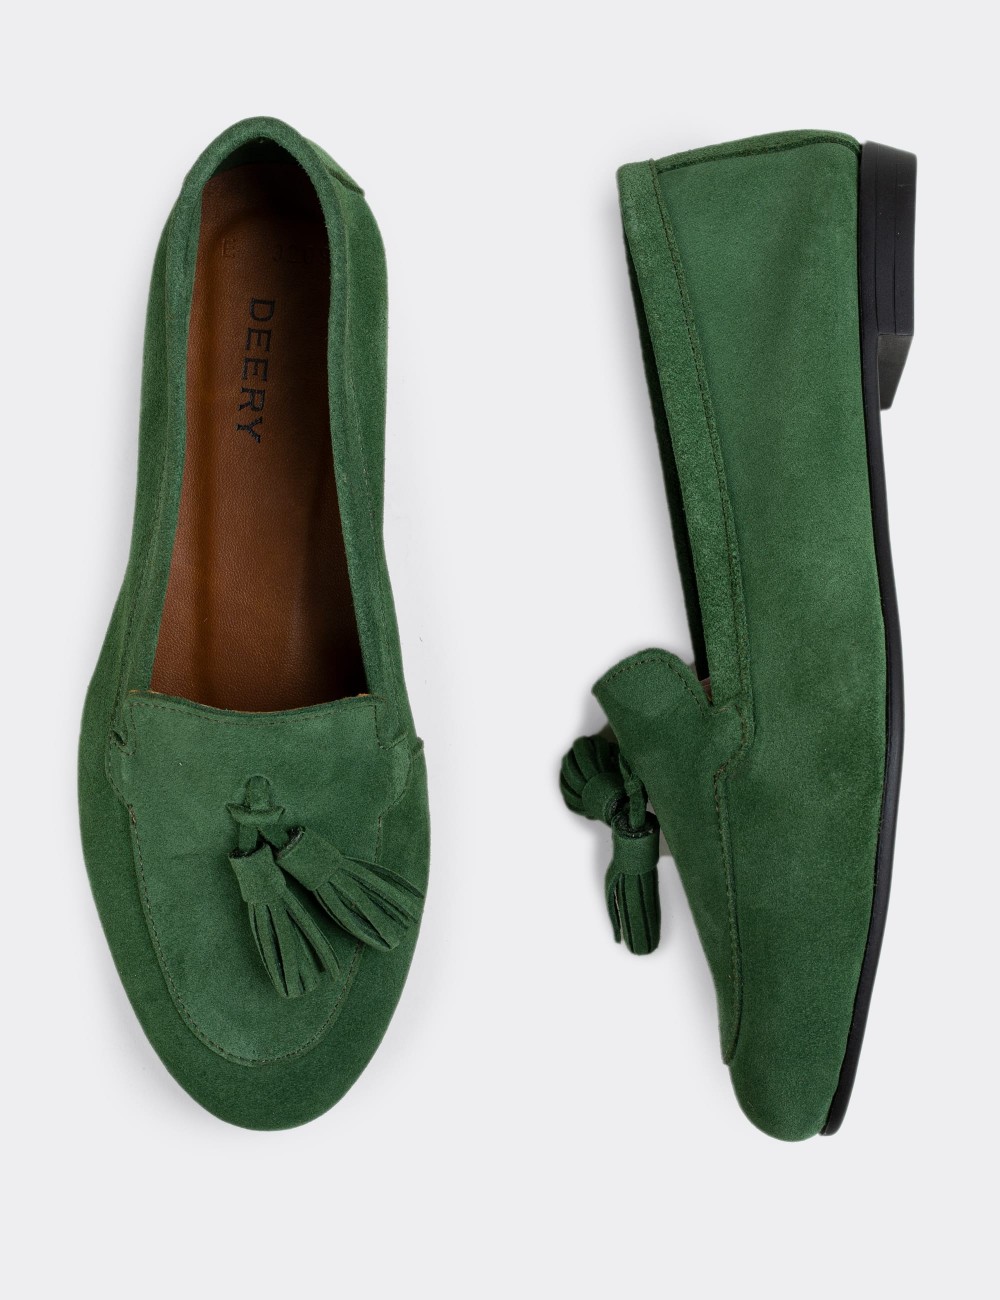 Green Suede Leather Loafers - E3209ZYSLC05